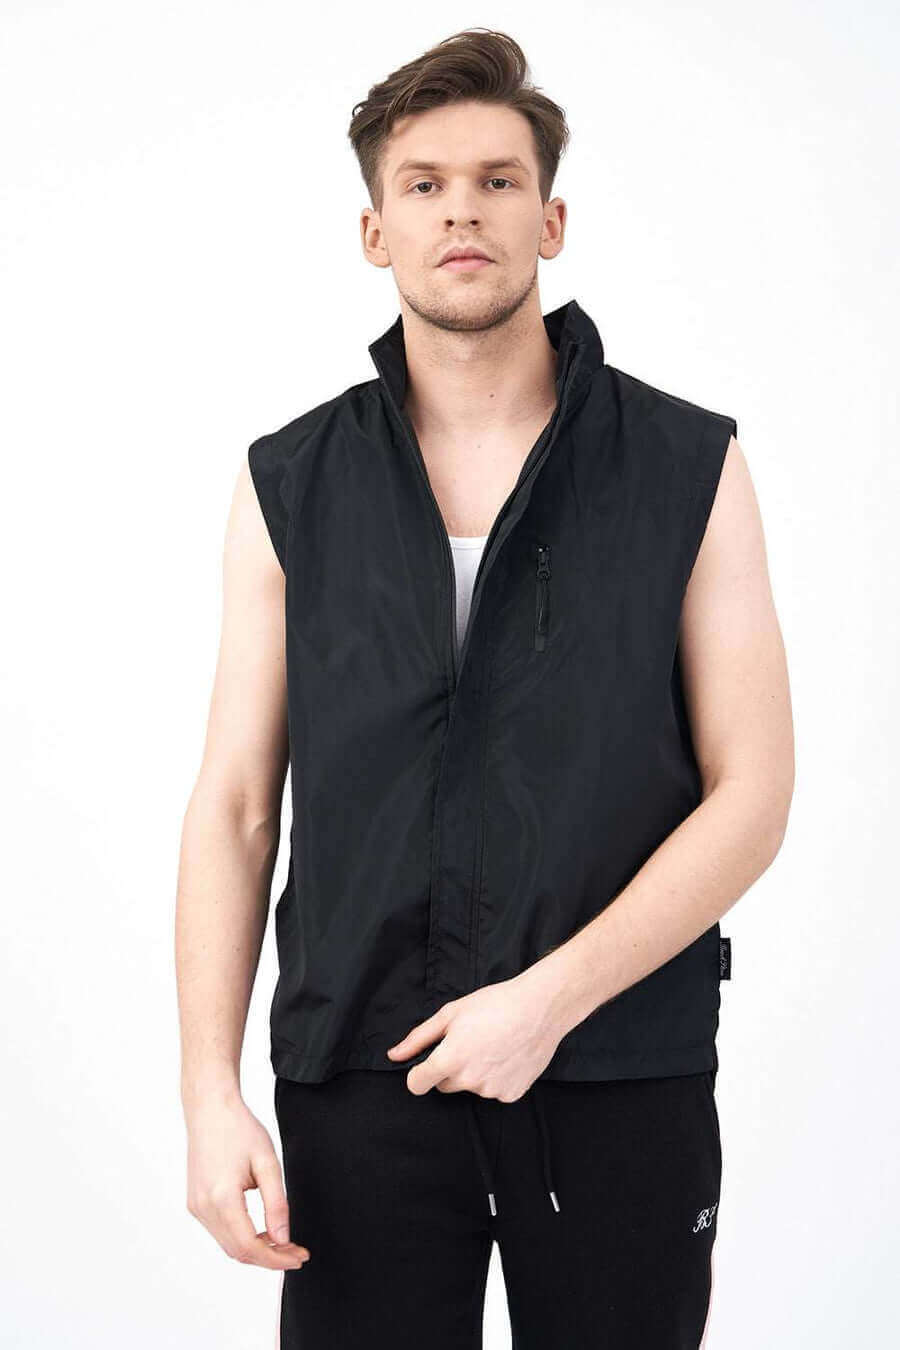 Front View of Sleeveless Jacket Designed for Men